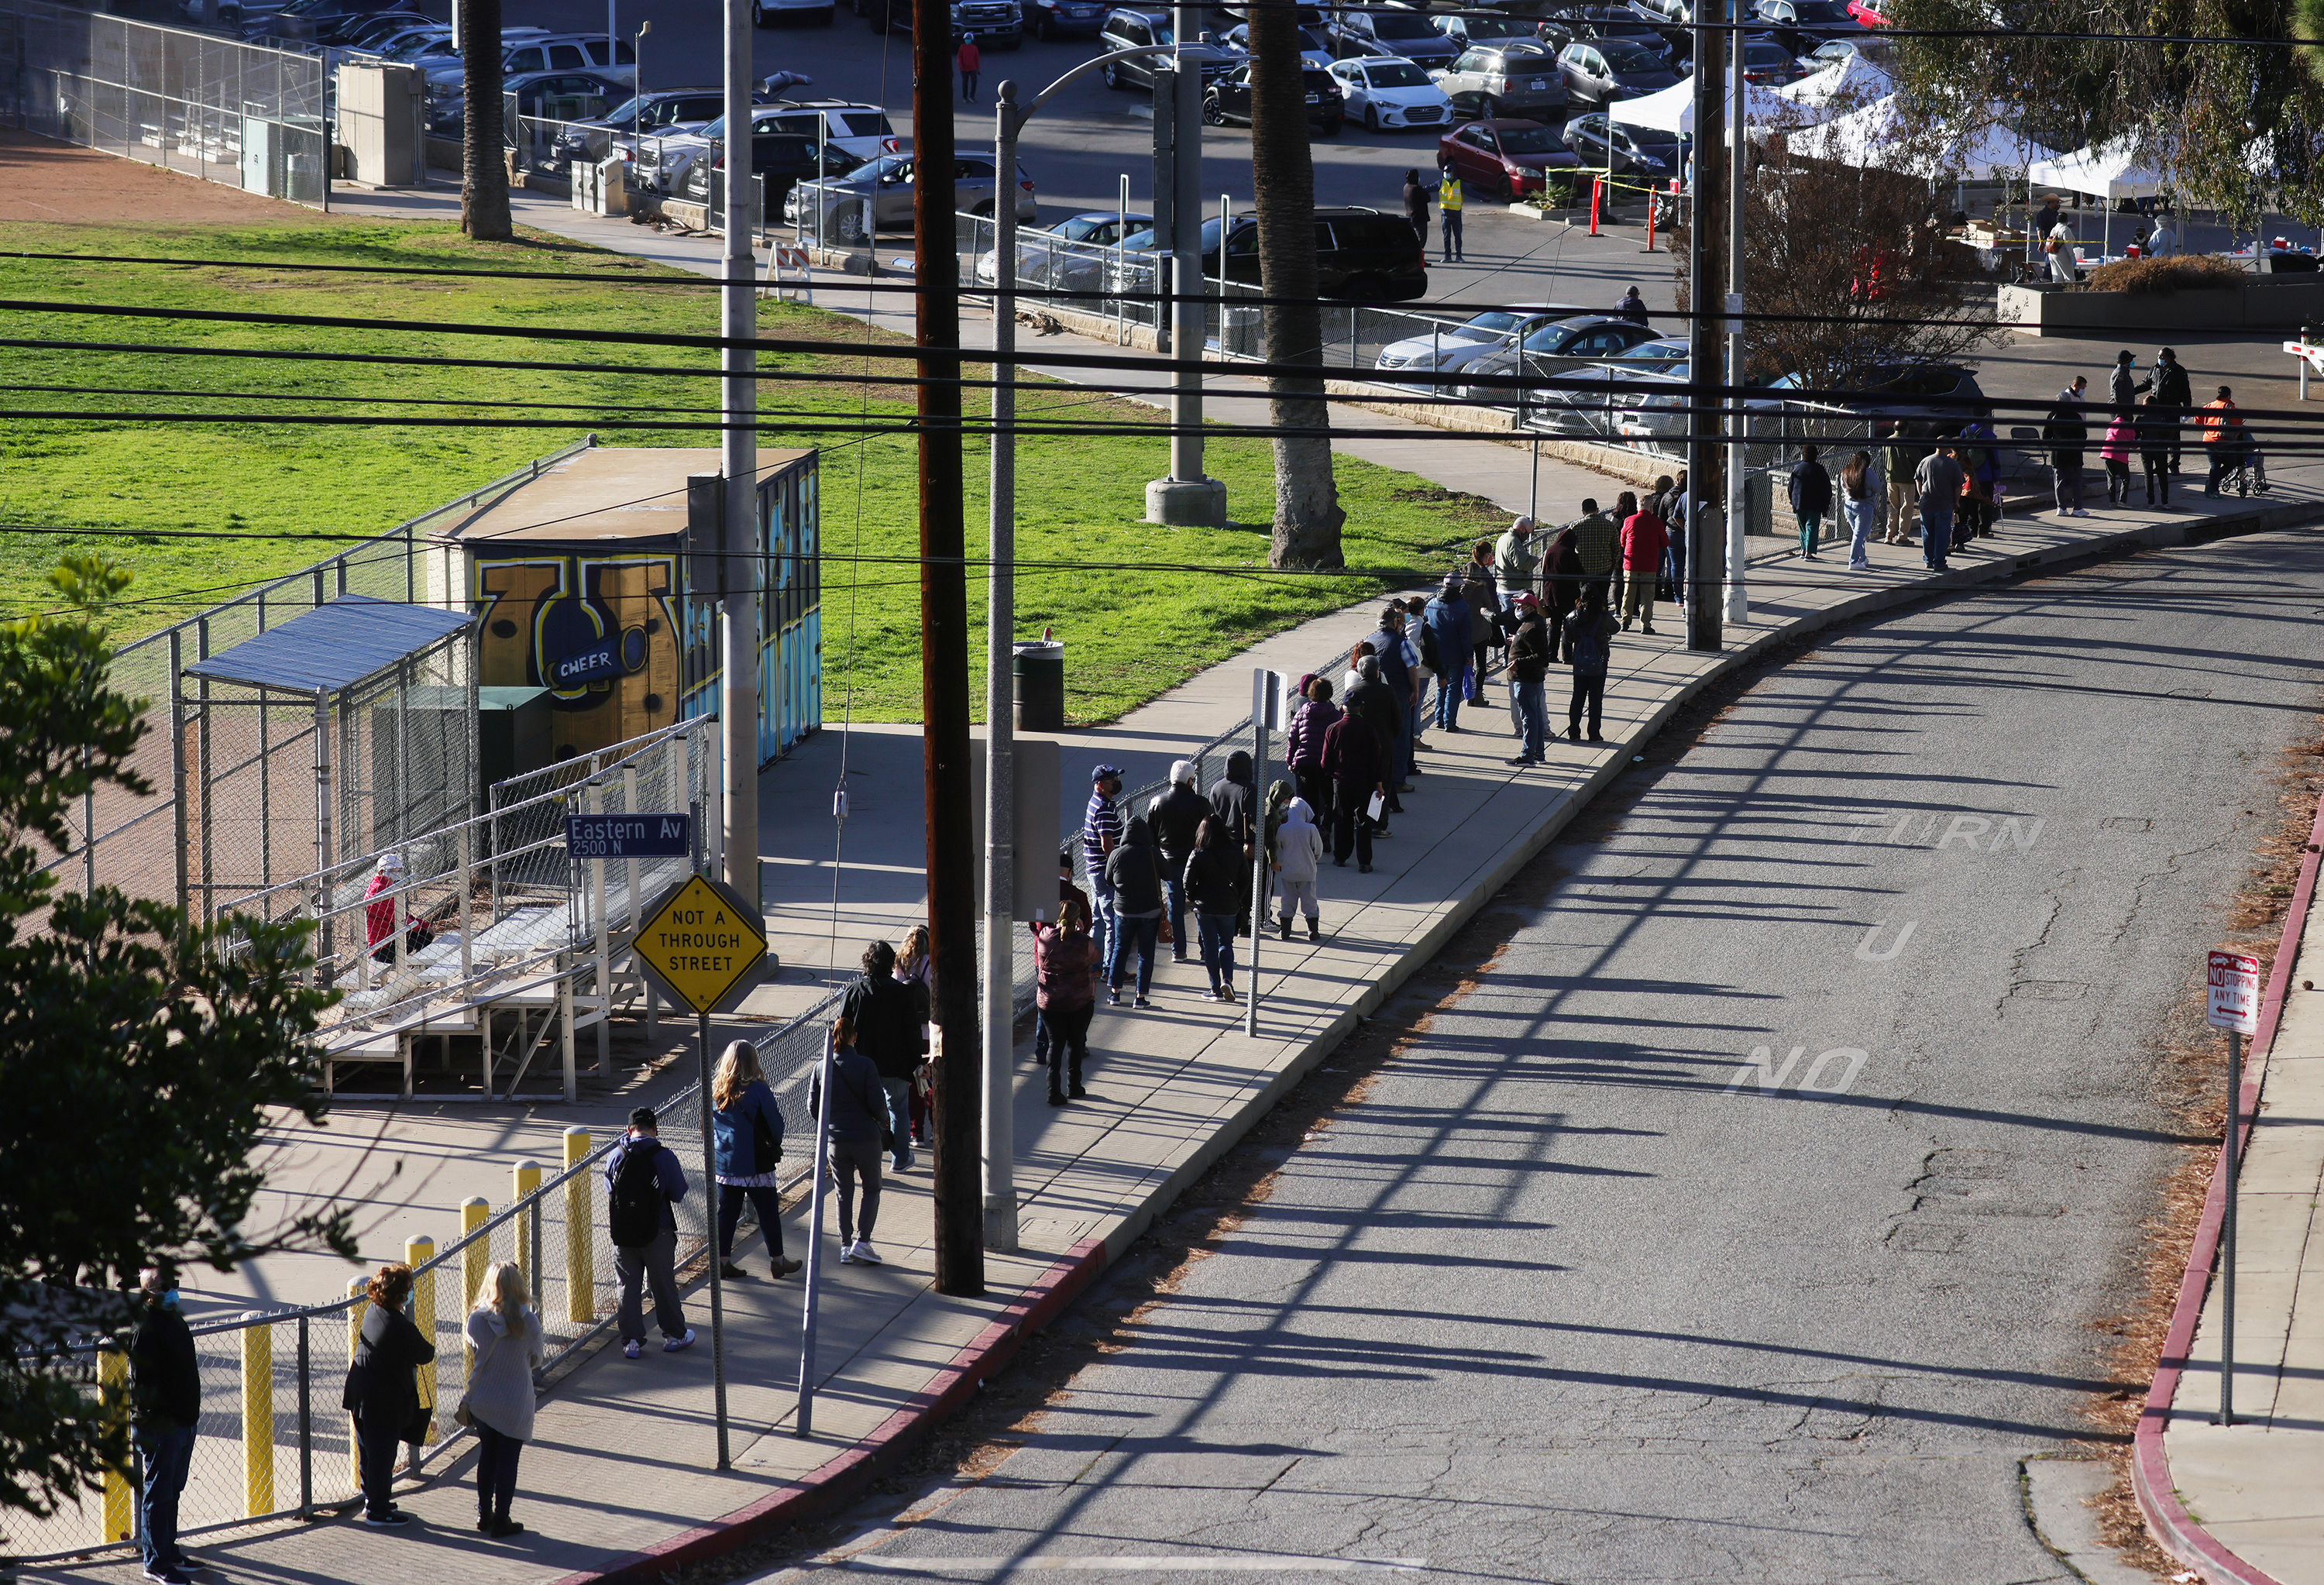 People with appointments wait in line to receive the COVID-19 vaccine at a walk-up public health vaccination site on Tuesday, January 26, in Los Angeles.